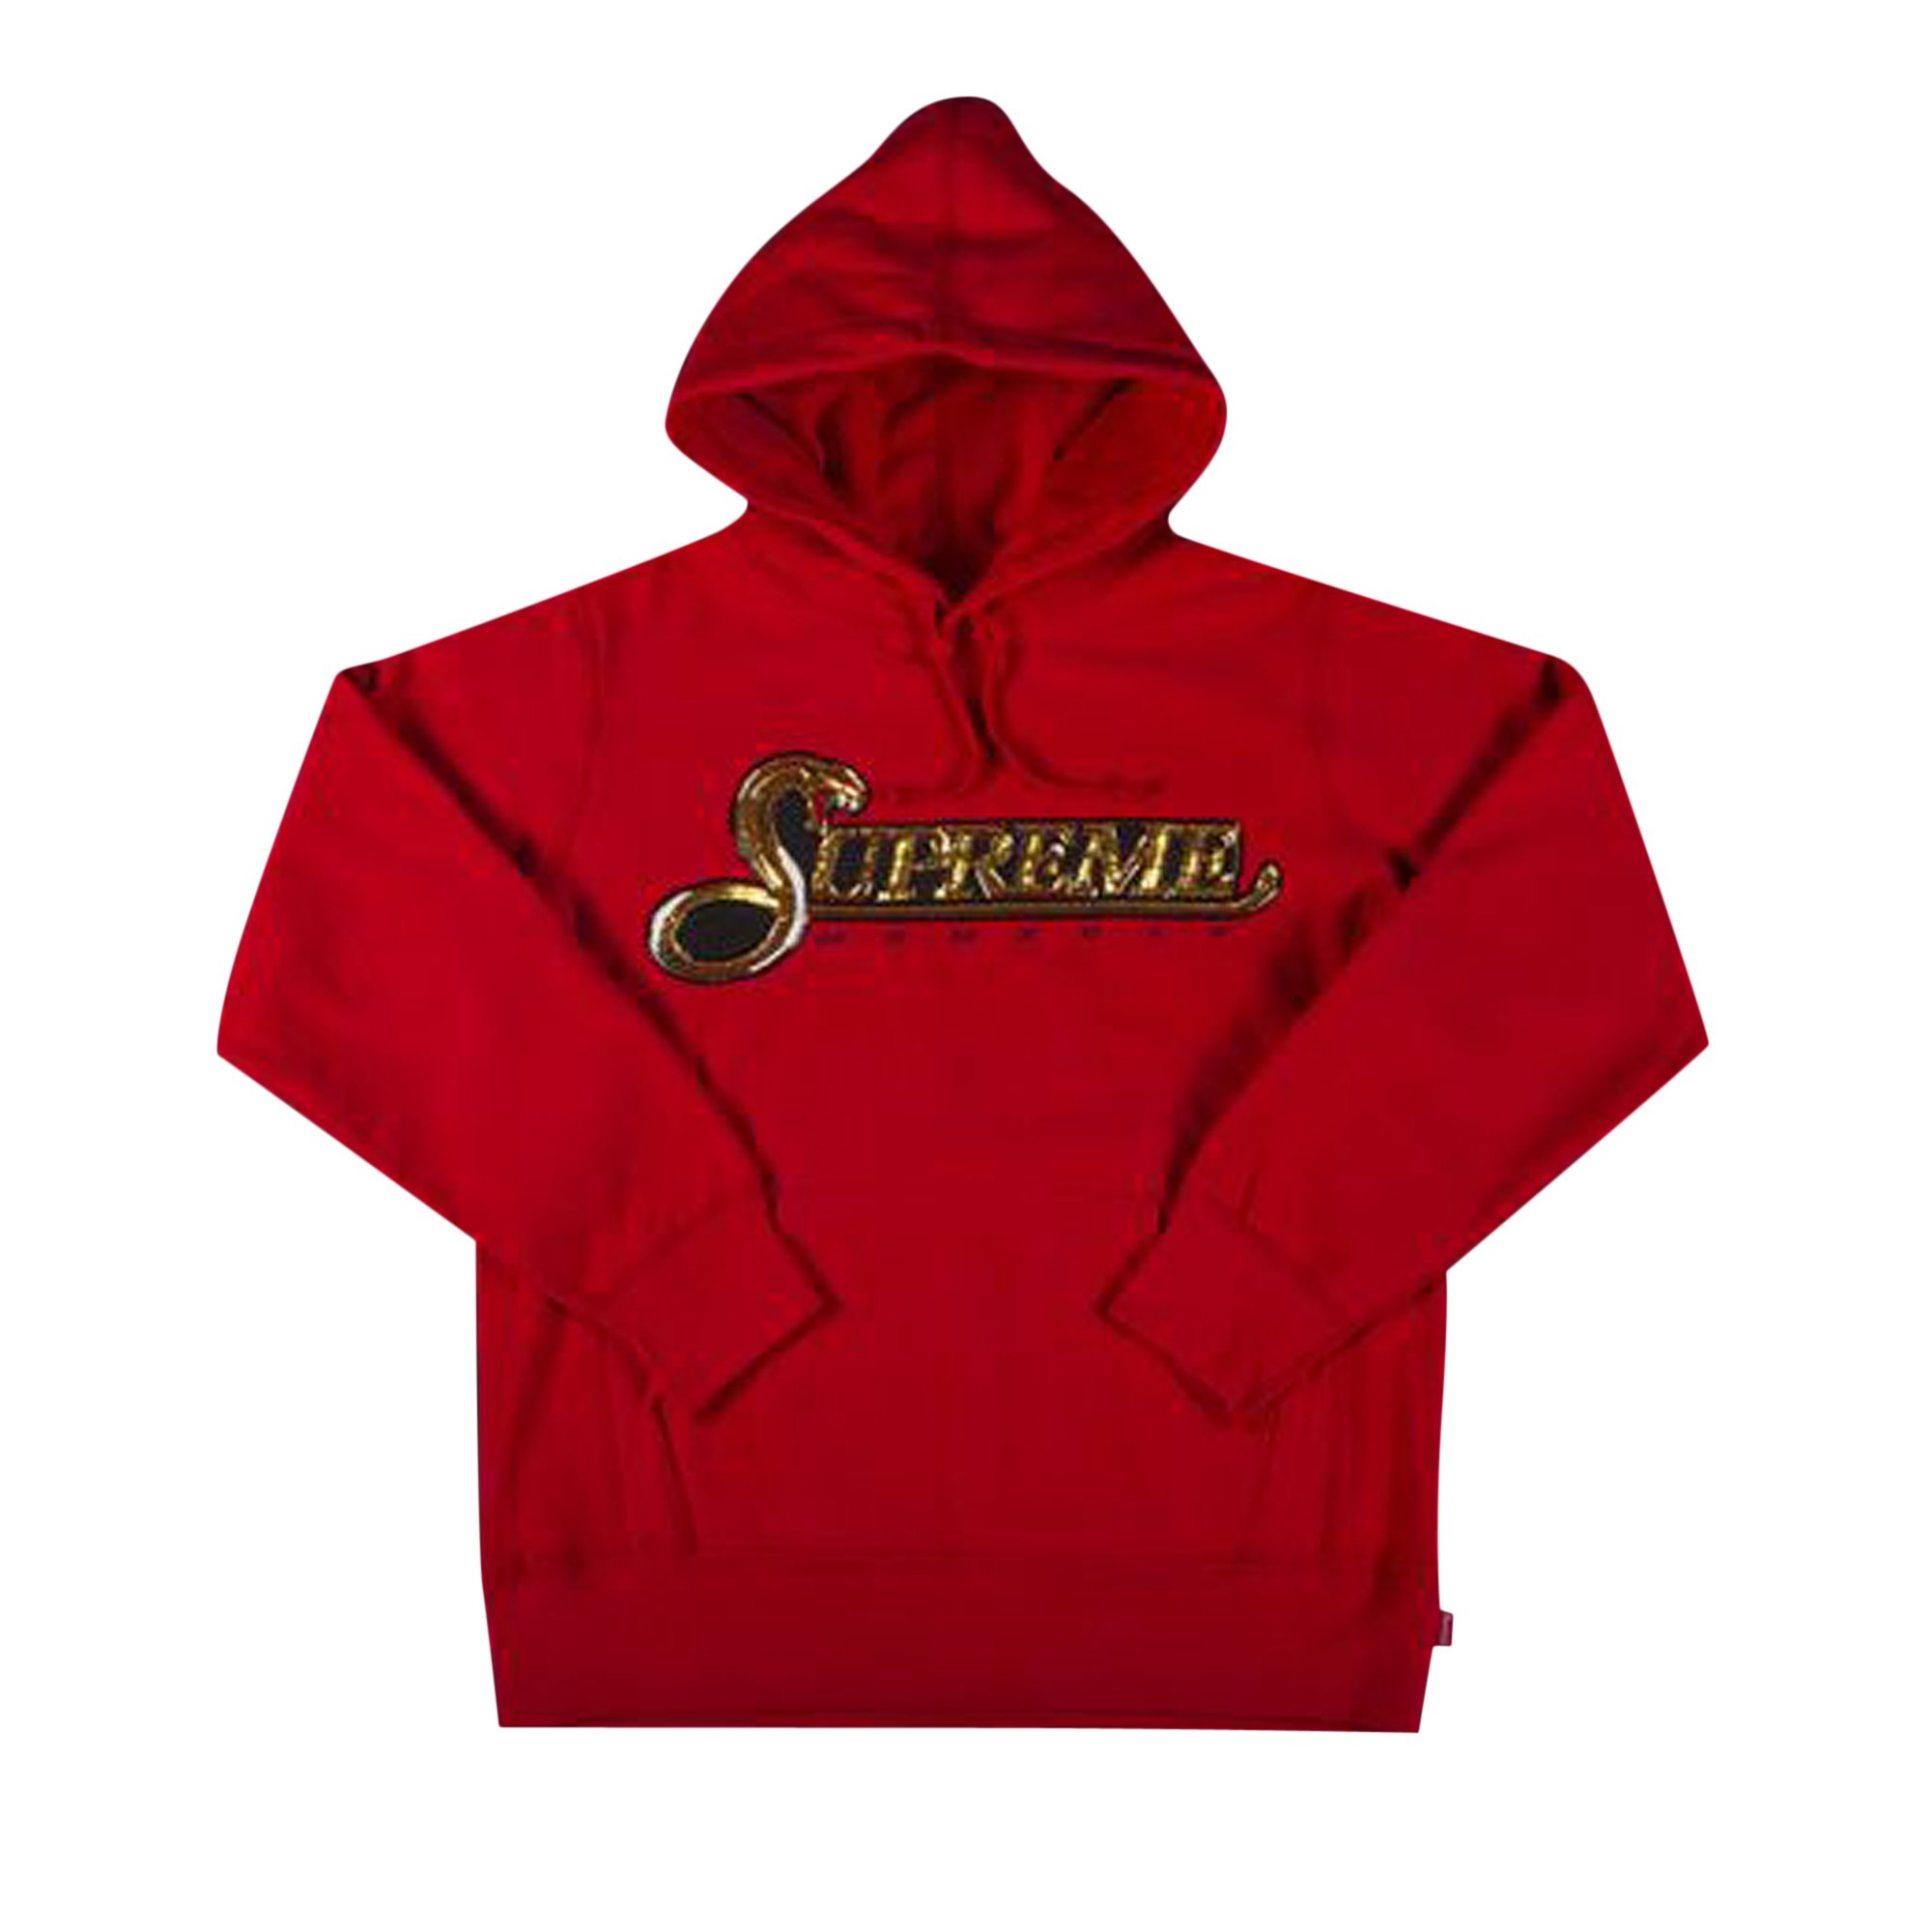 Buy Supreme Sequin Viper Hooded Sweatshirt 'Red' - FW19SW27 RED